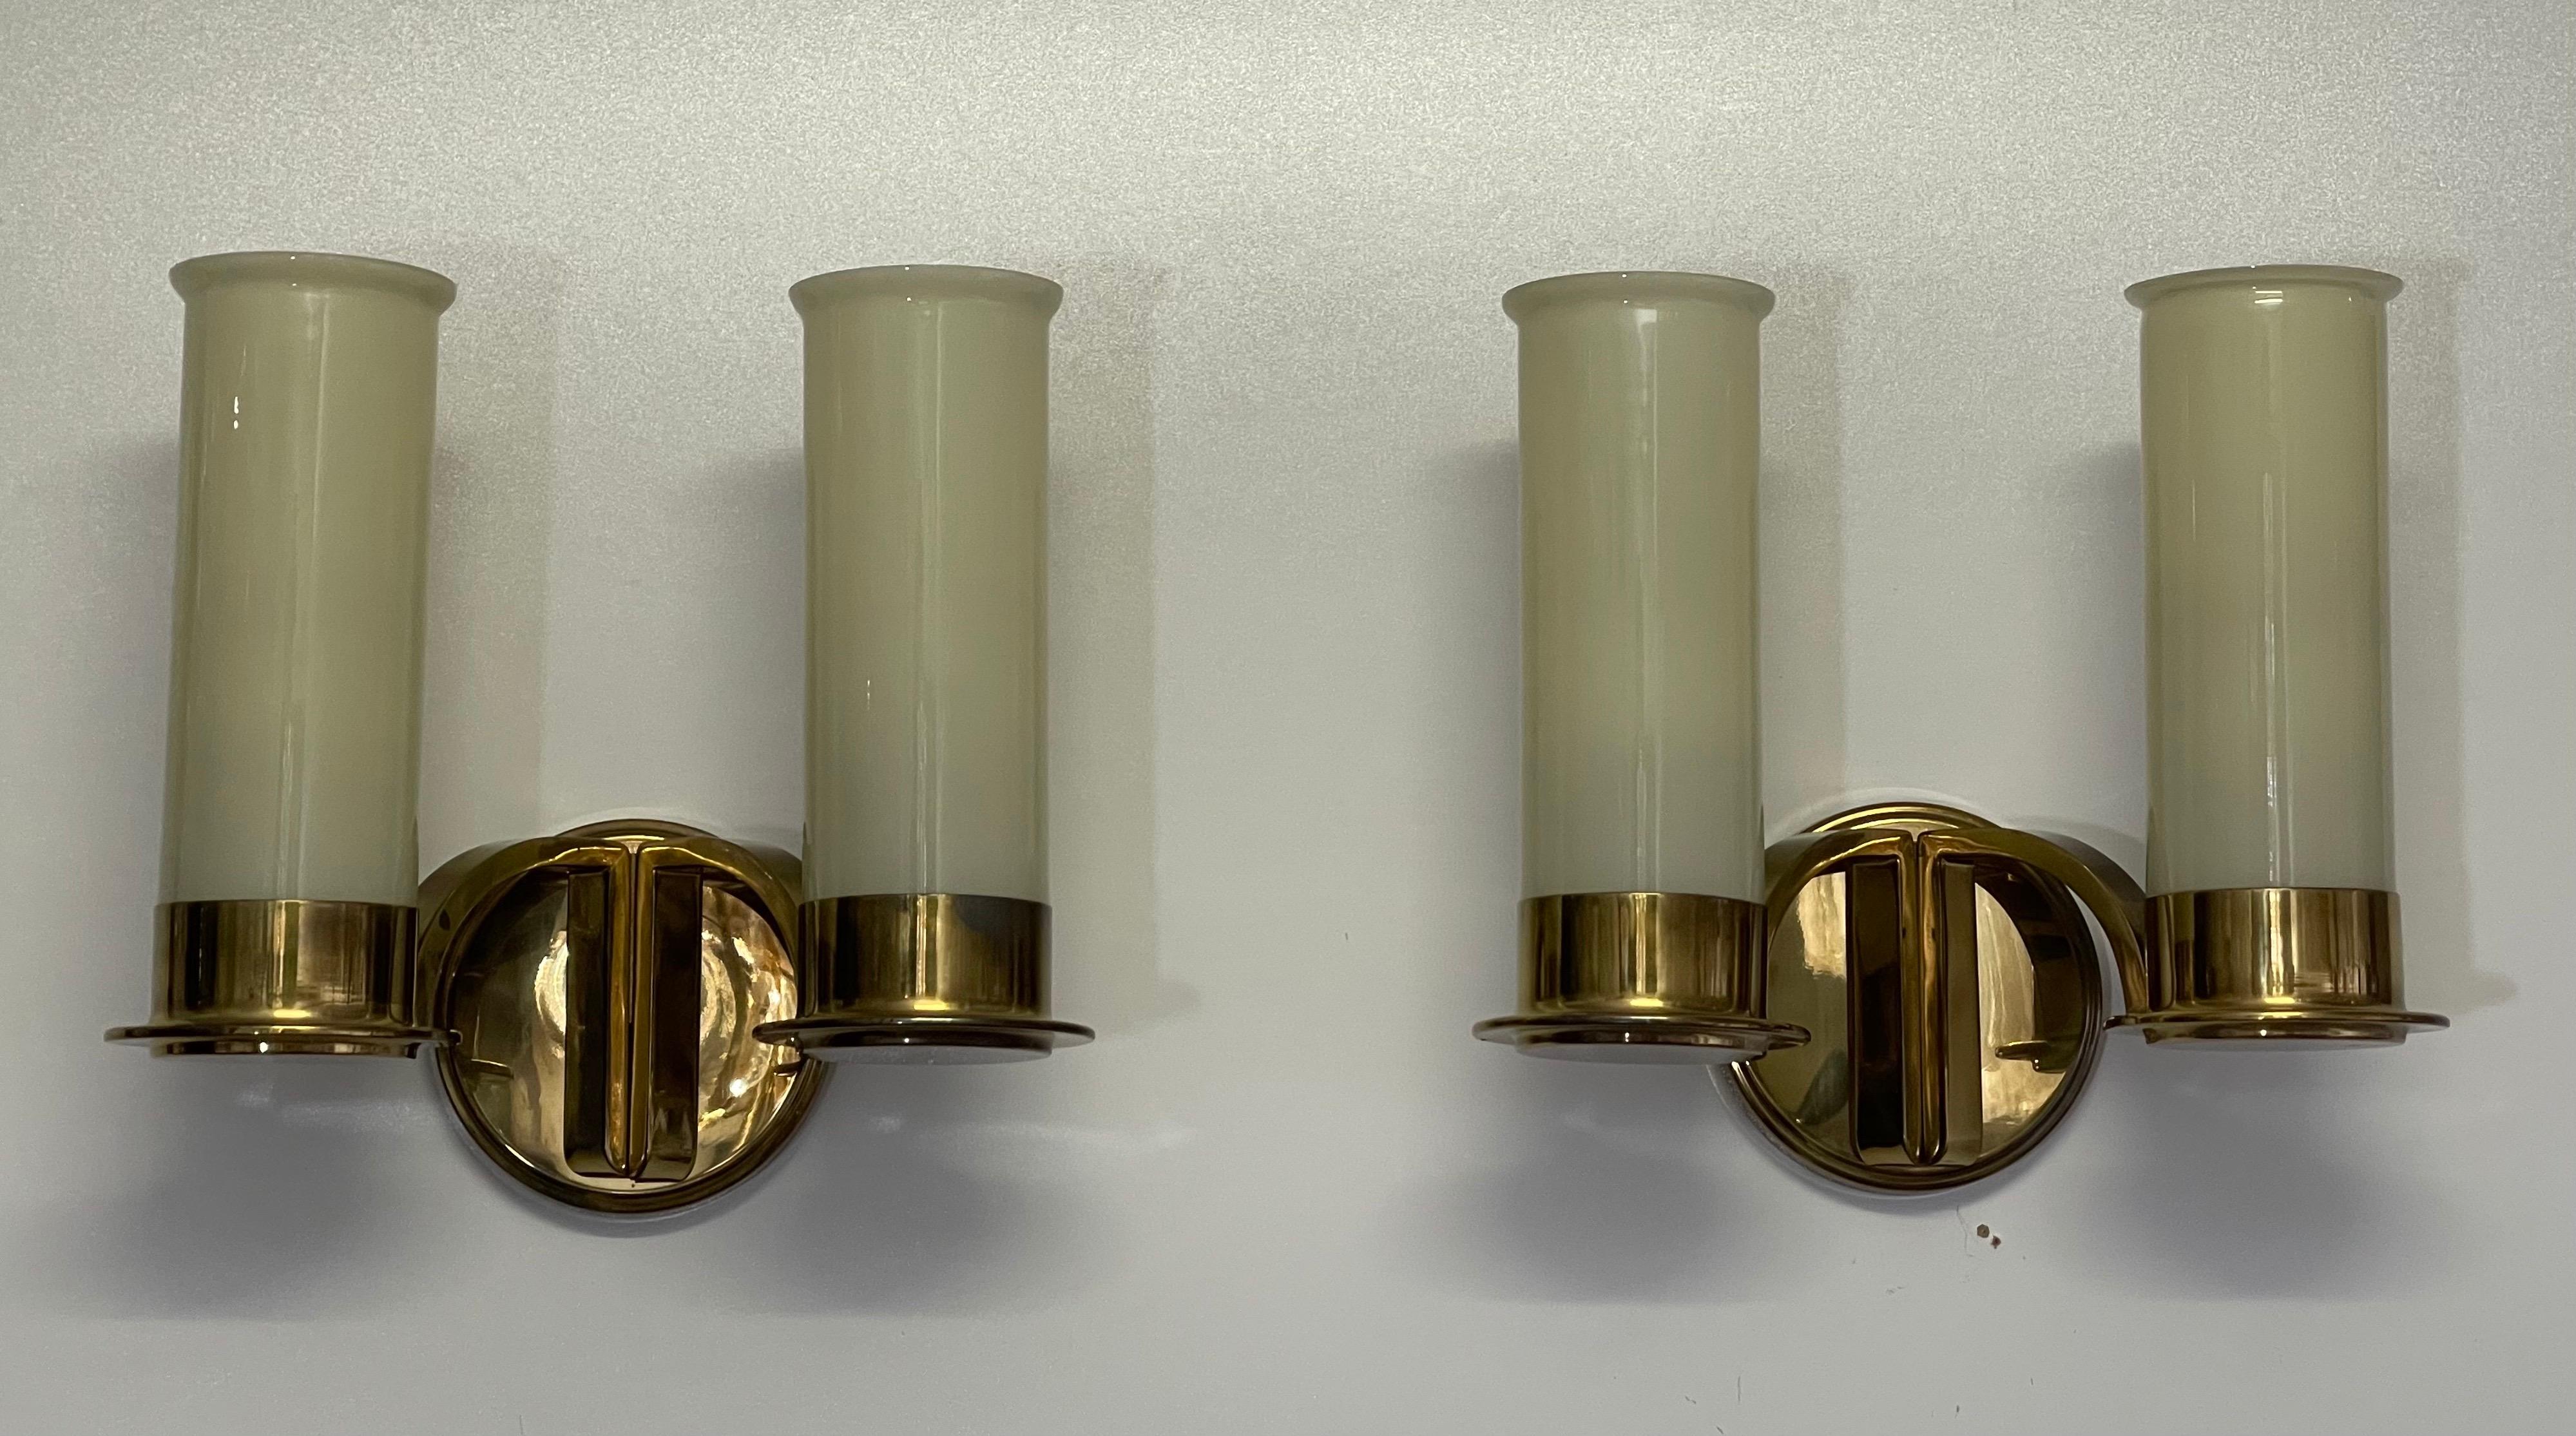 Set of Four Large Brass and Opal Glass Wall Sconces, circa 1930s For Sale 5